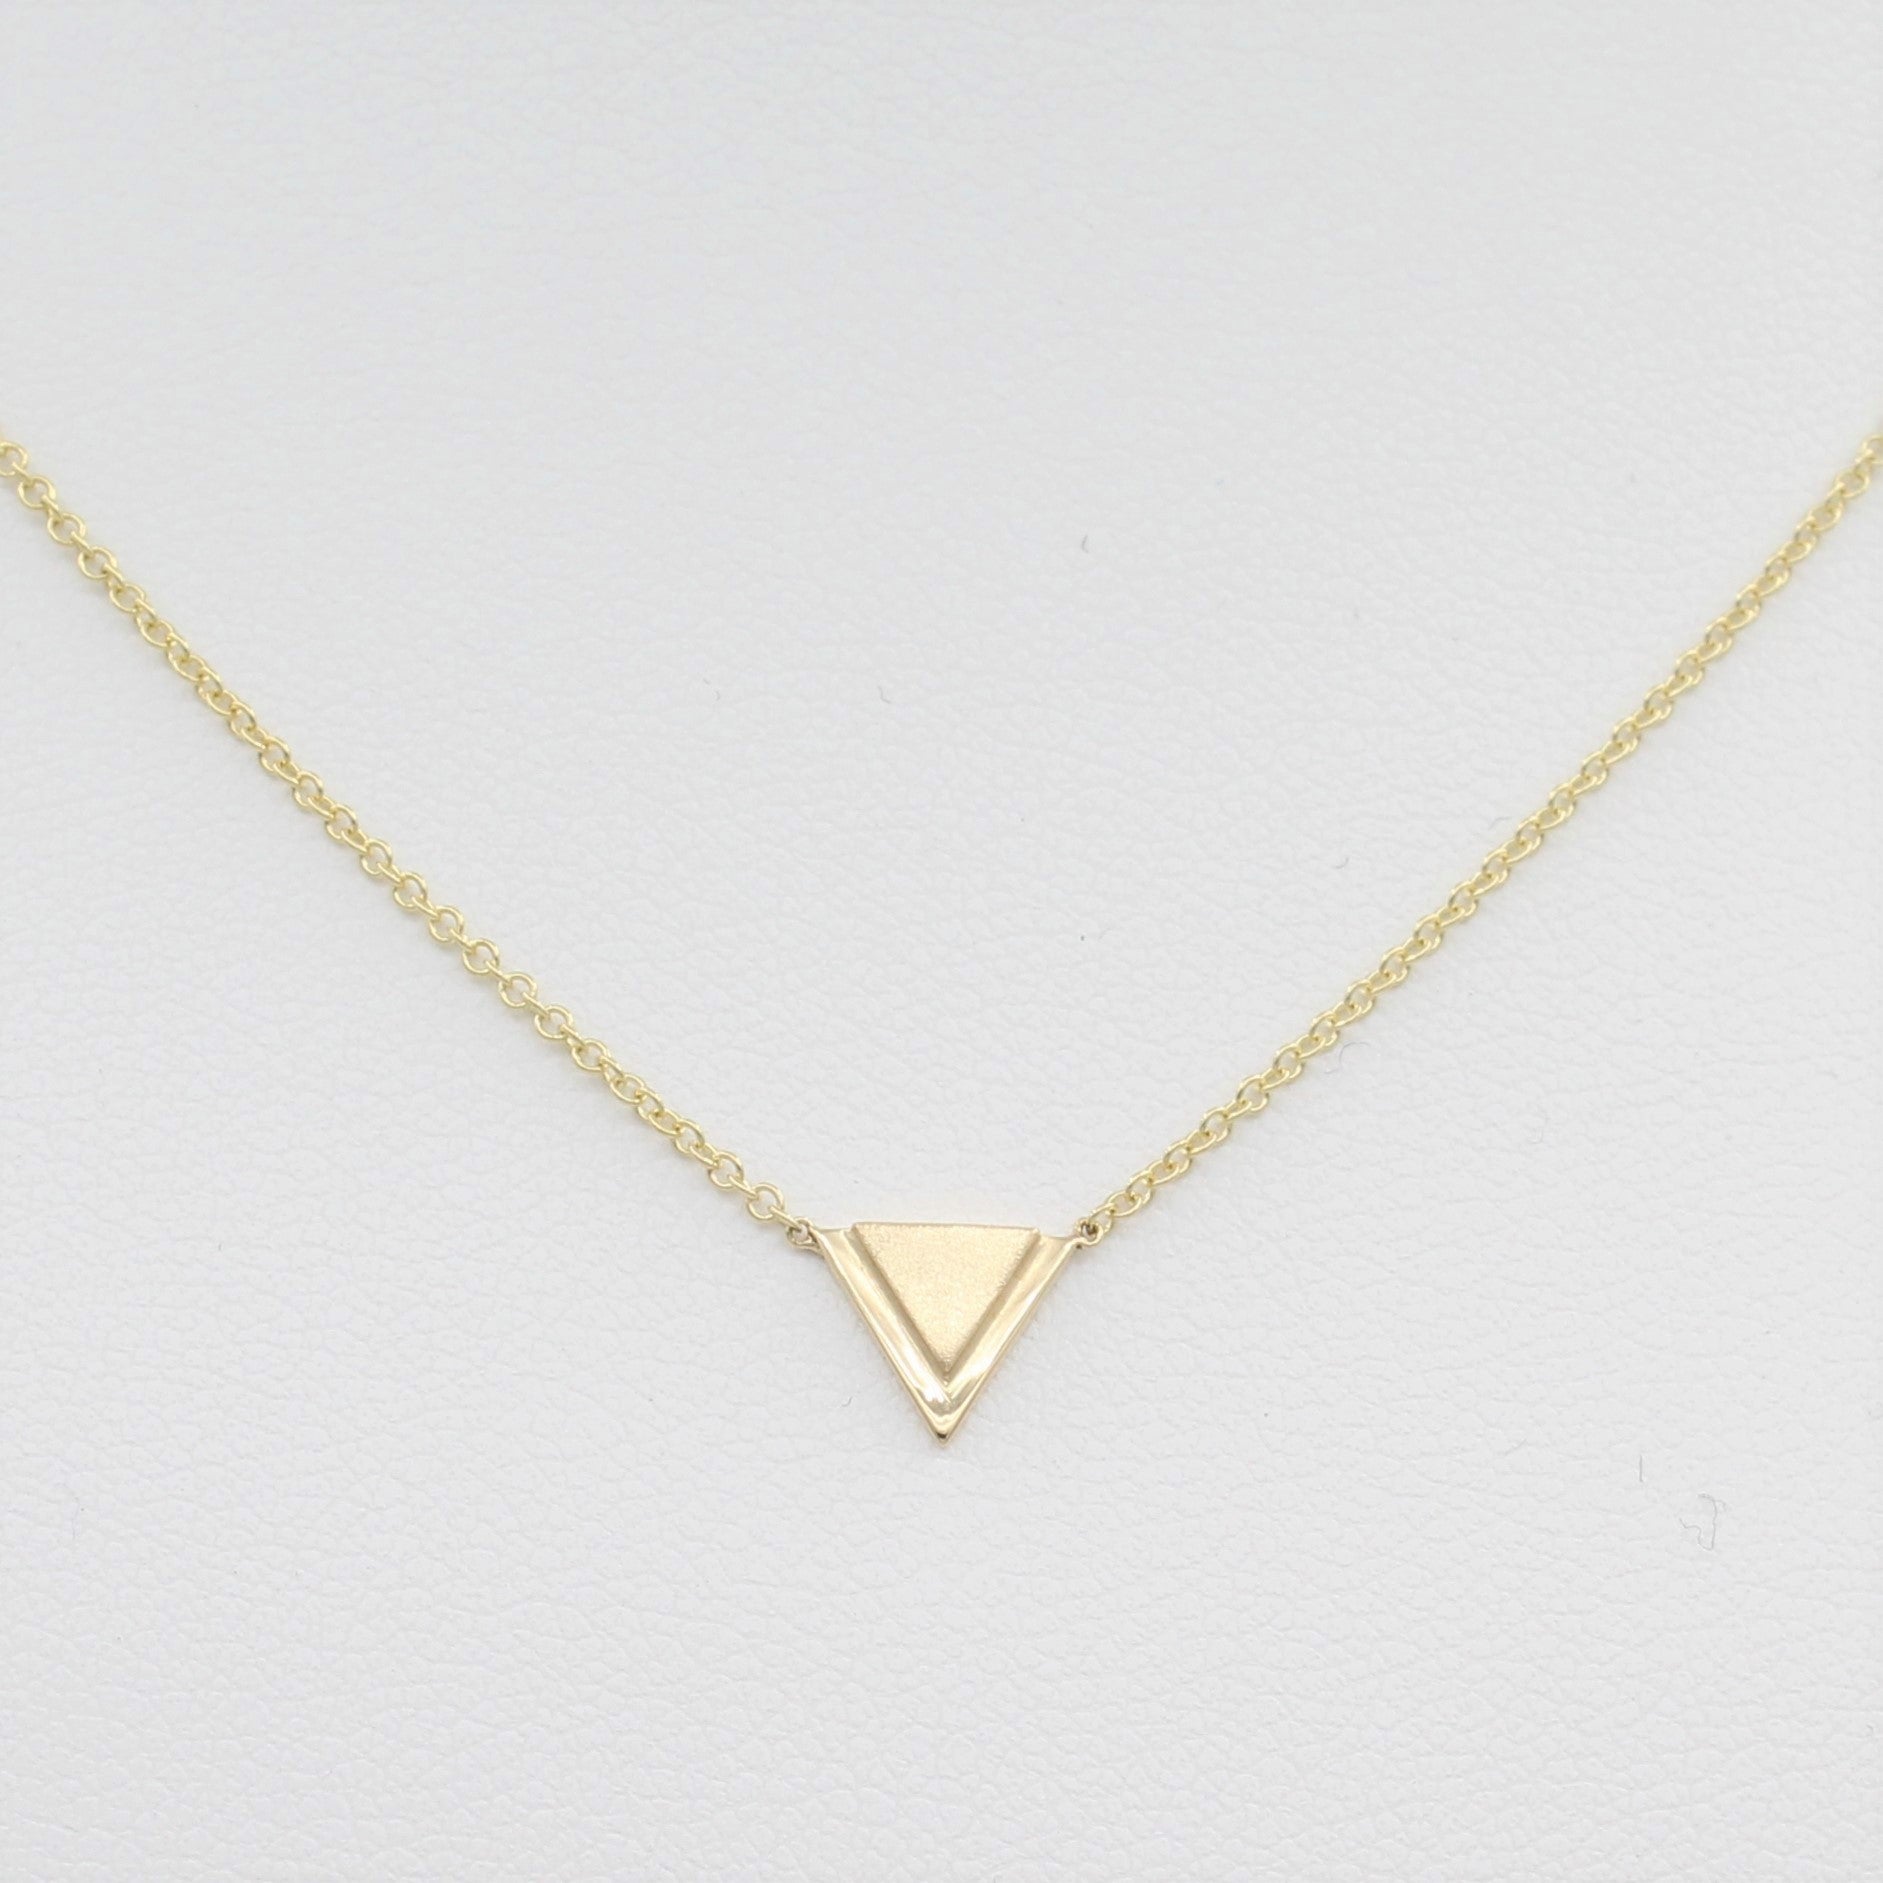 14k Yellow Gold Petite Double Triangle Single Station Pendant, close-up front view of necklace highlighting the double triangle pendant. 